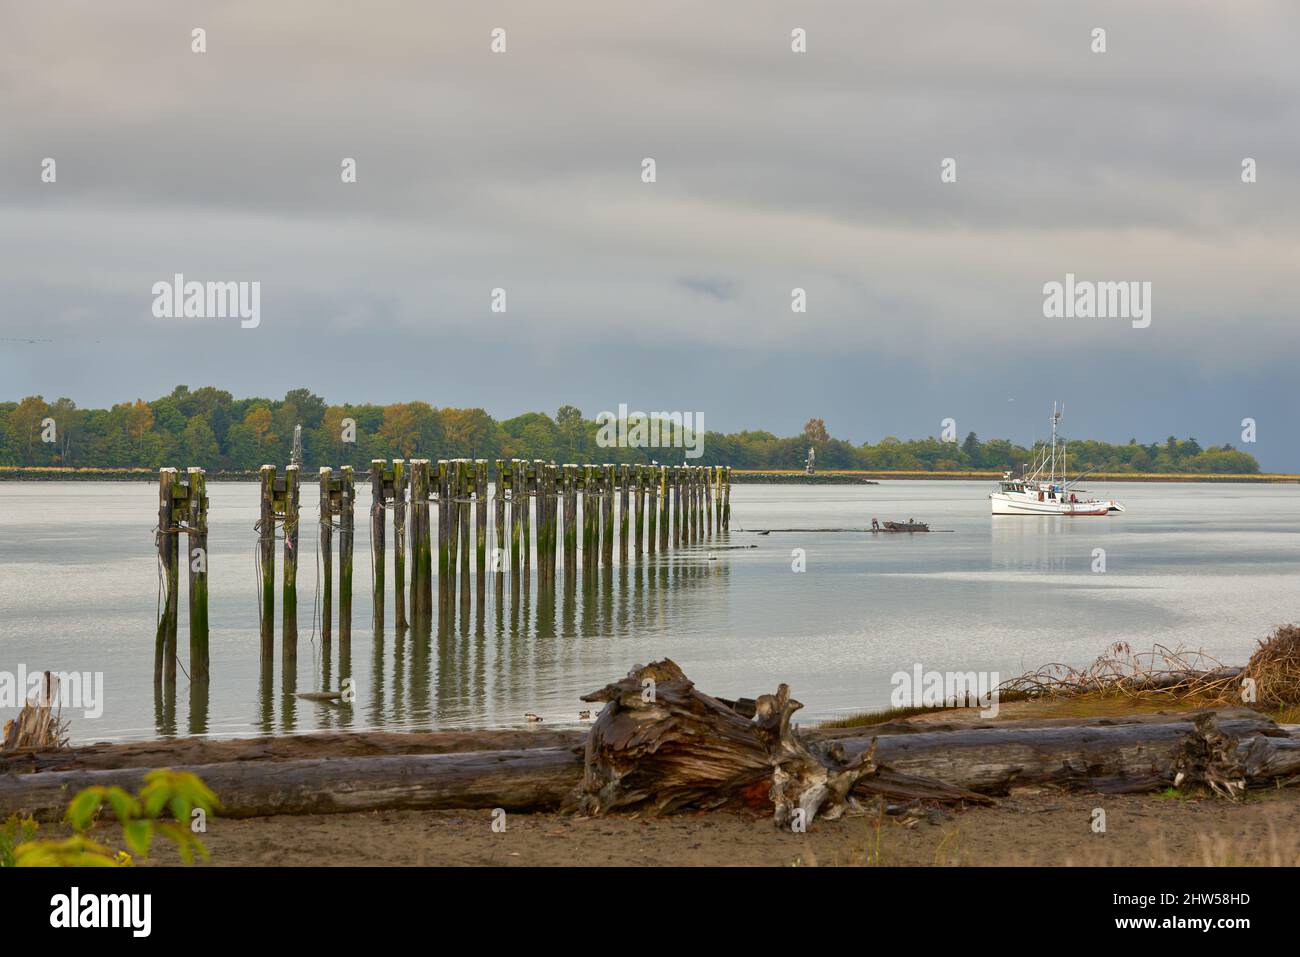 Fraser River Driftwood Barrier. A fishboat maneuvers on the Fraser River near pilings that block driftwood from Steveston Harbour. Richmond, British C Stock Photo